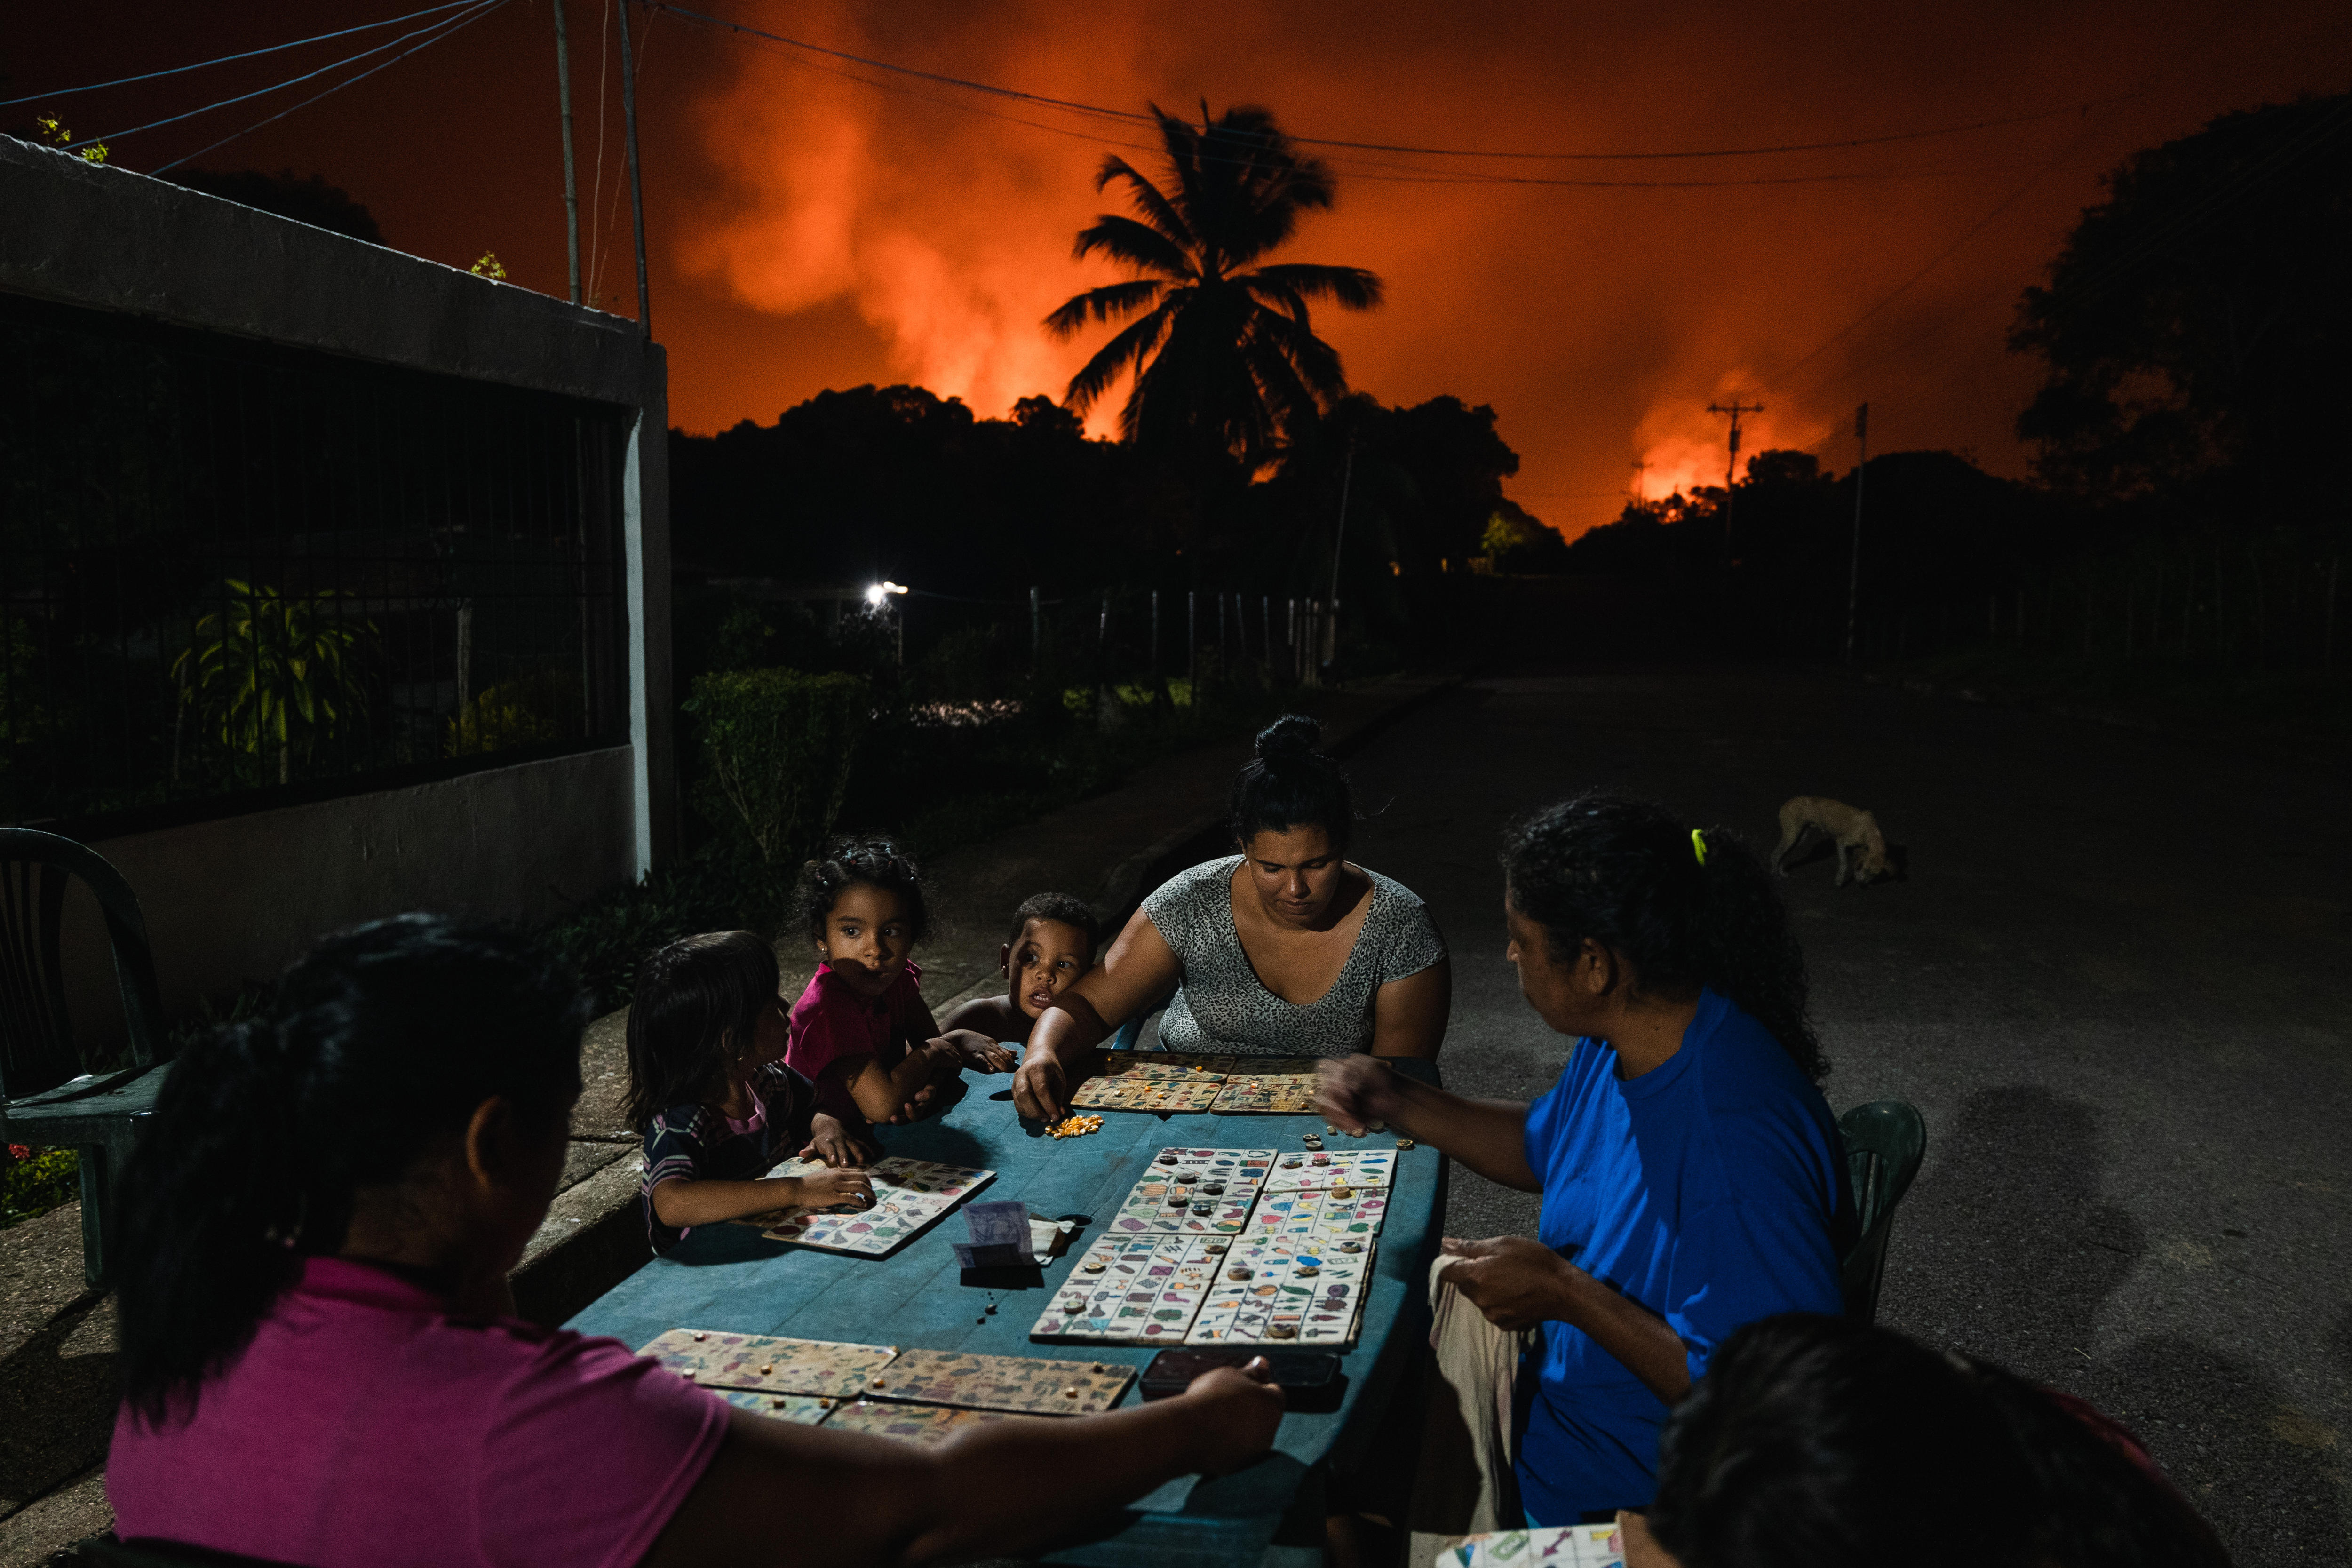 A family sits around an outdoor table playing a board game as a big bush fire rages behind them in the distance